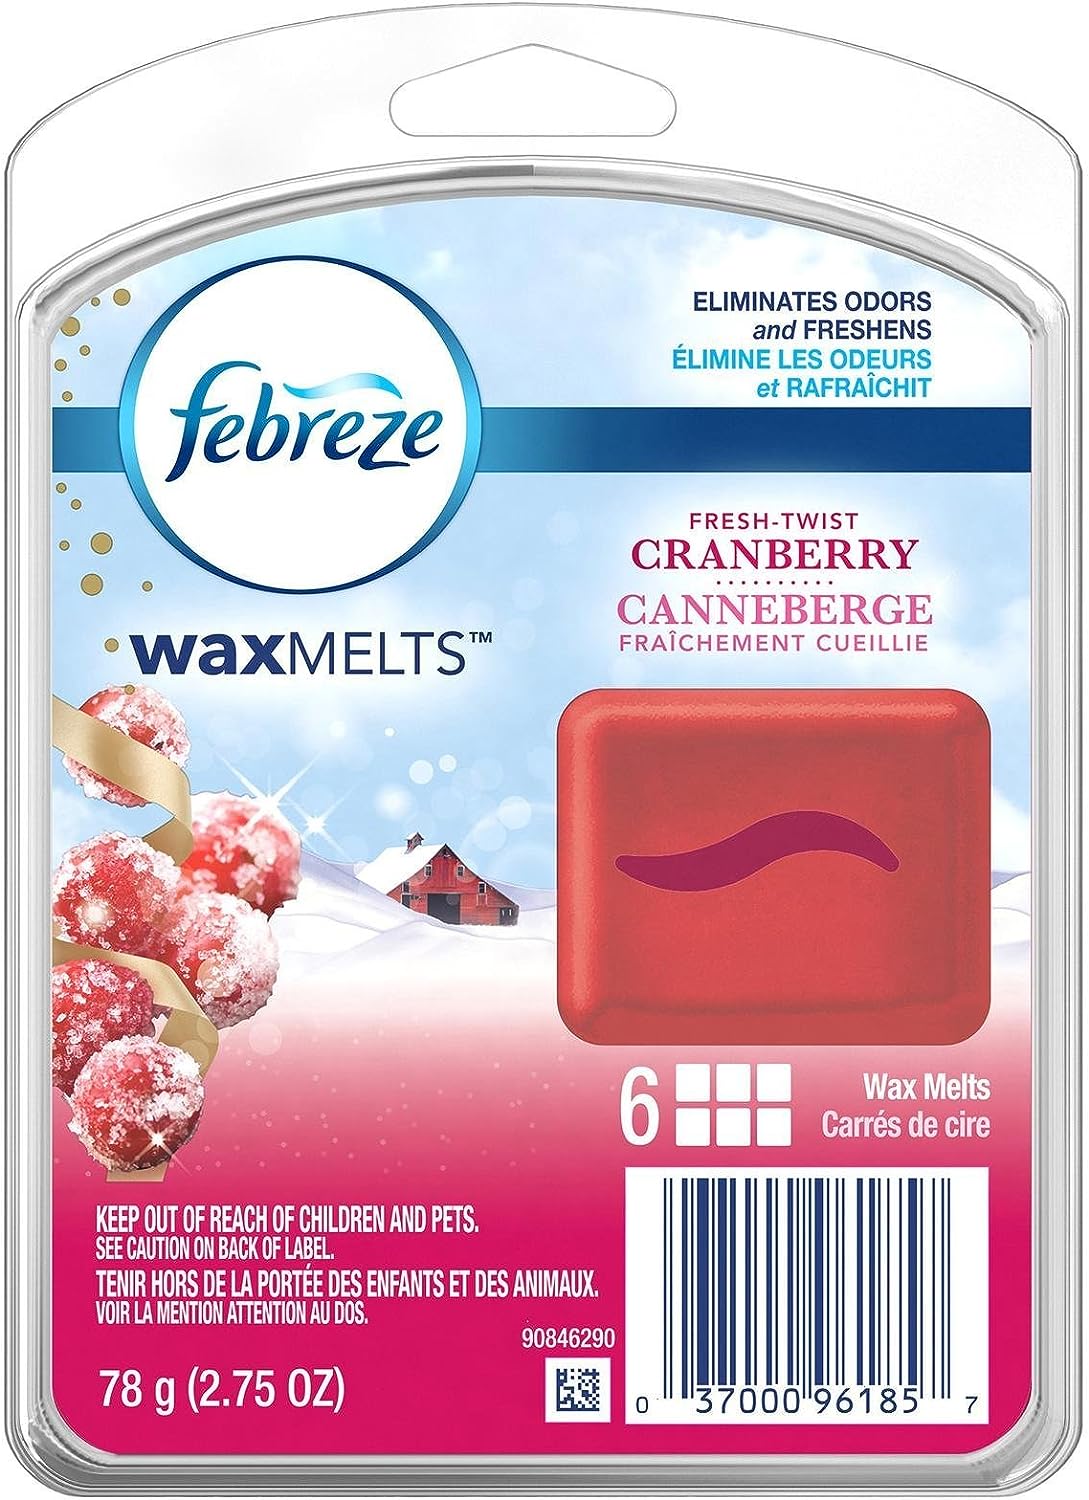  Febreze Unstopables Premium Wax Melts - Fresh Scent - 8 Count Wax  Melts Per Package - Net Wt. 3 OZ (85 g) Per Package - Pack of 2 Packages :  Health & Household